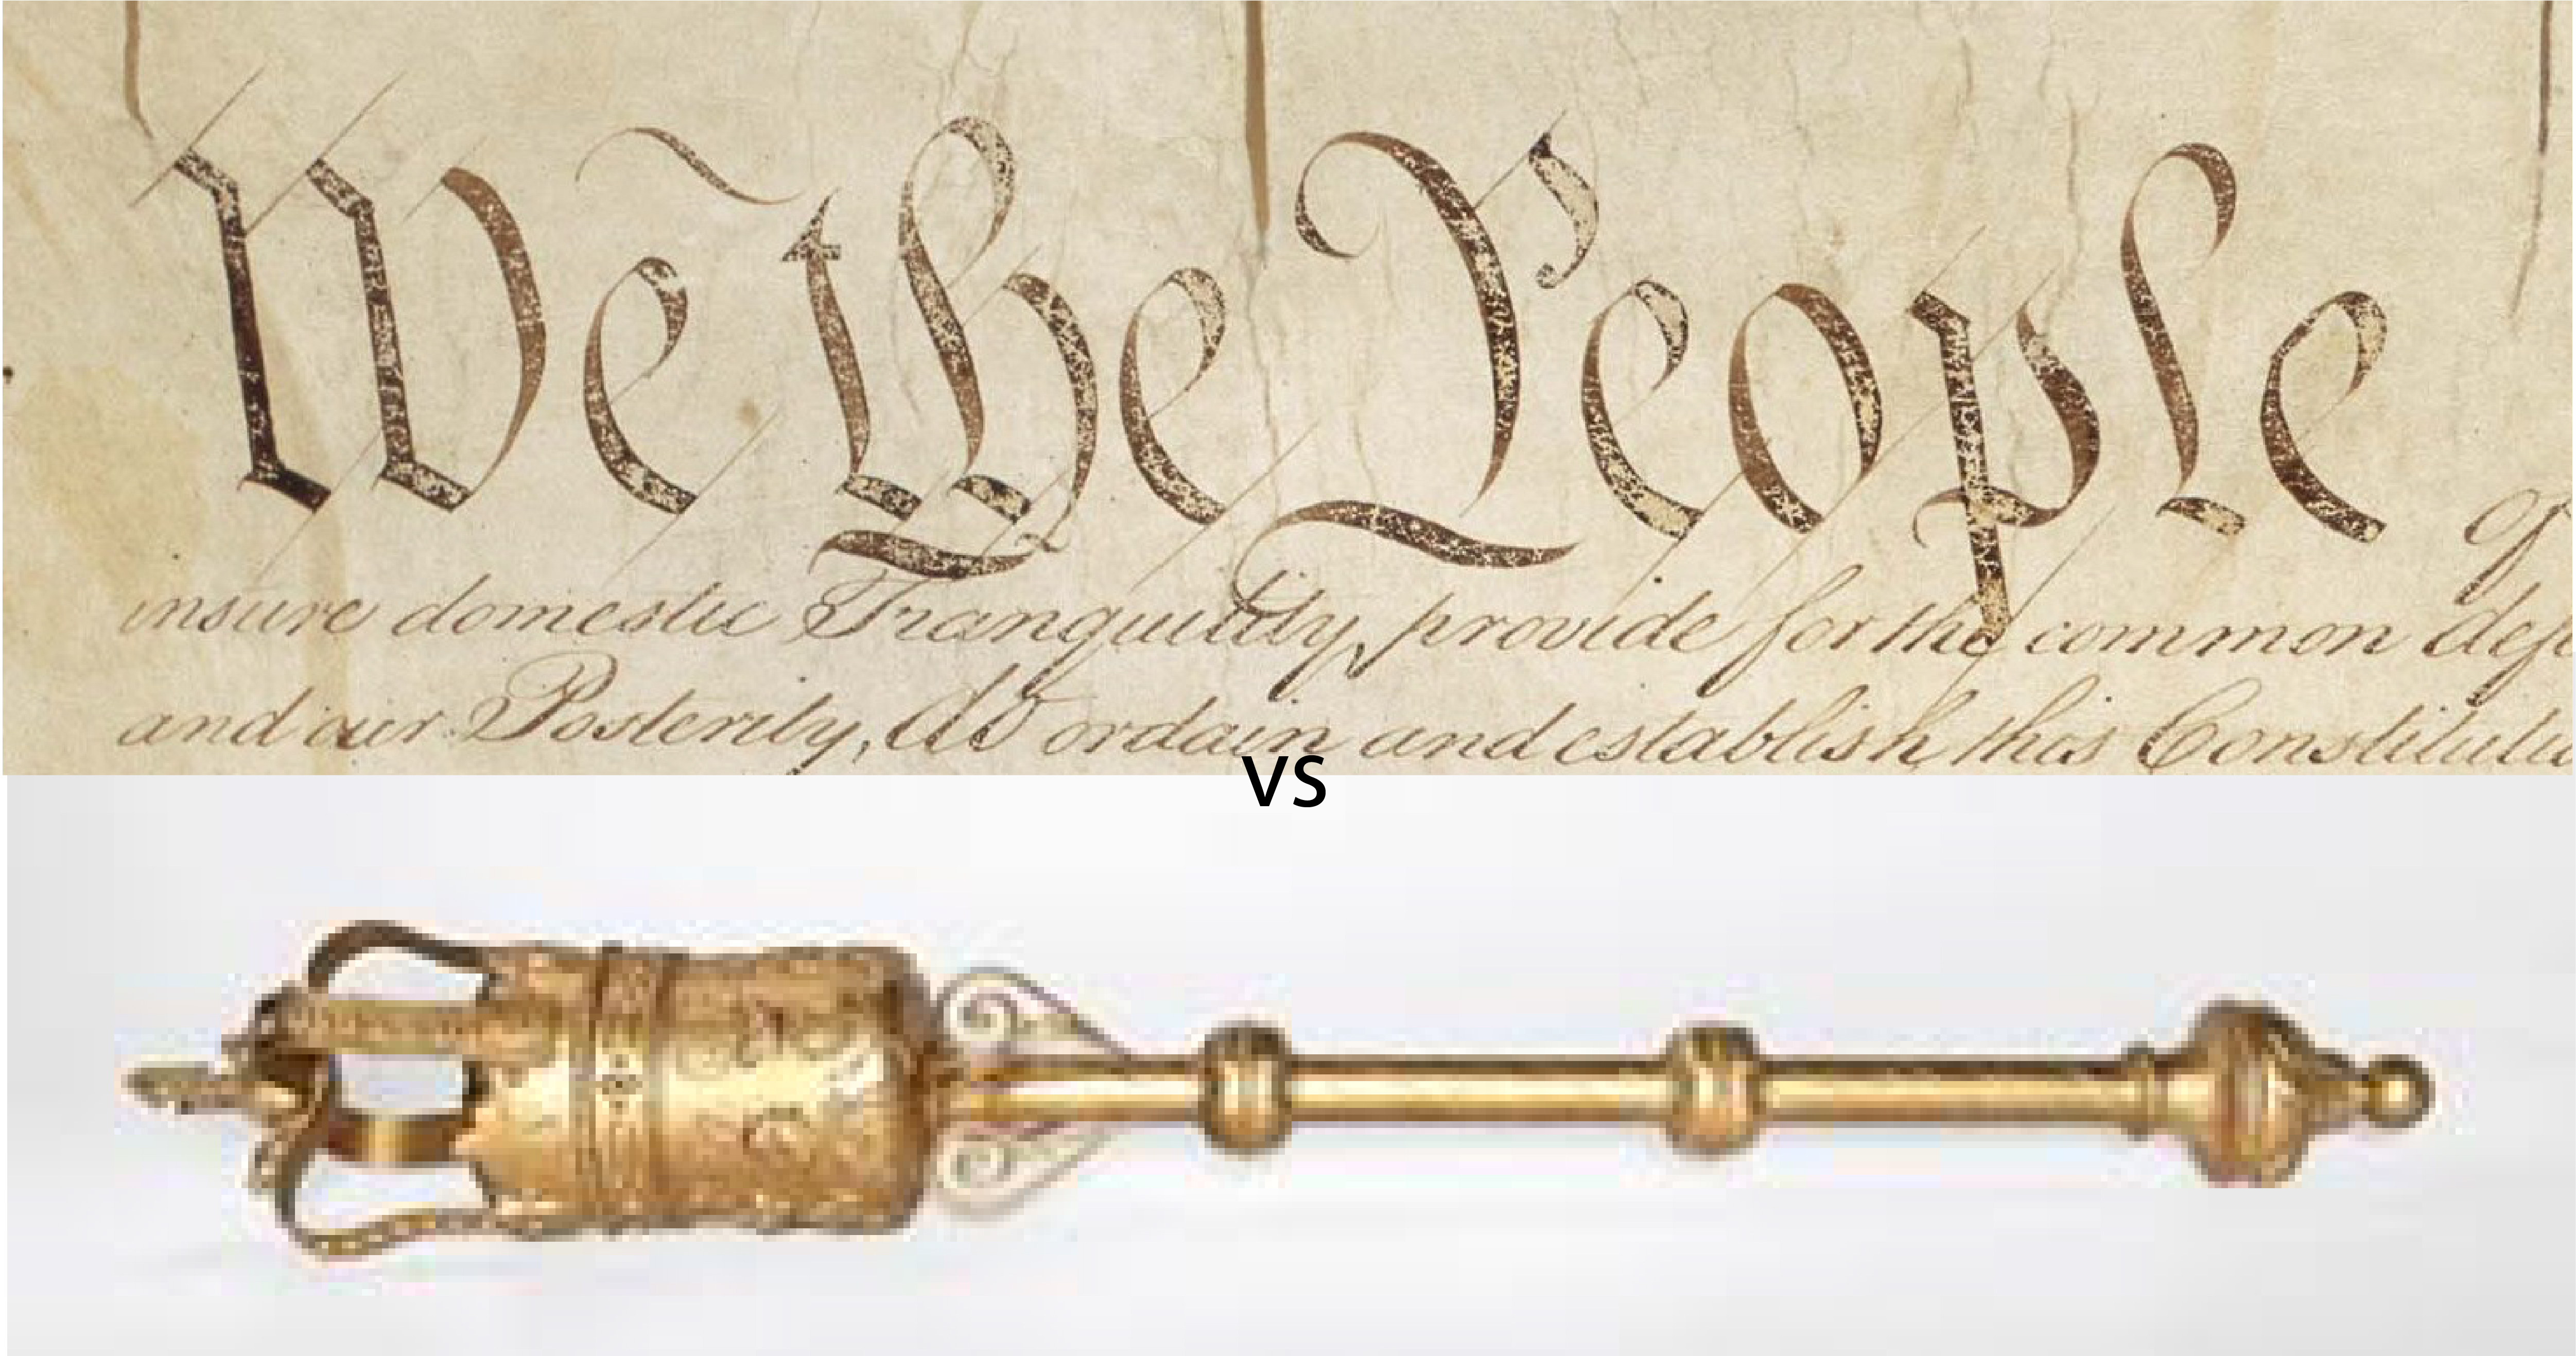 The U.S. Constitution draws its authority from the will of the people, whereas the U.K. ceremonial mace is a symbol of the crown.